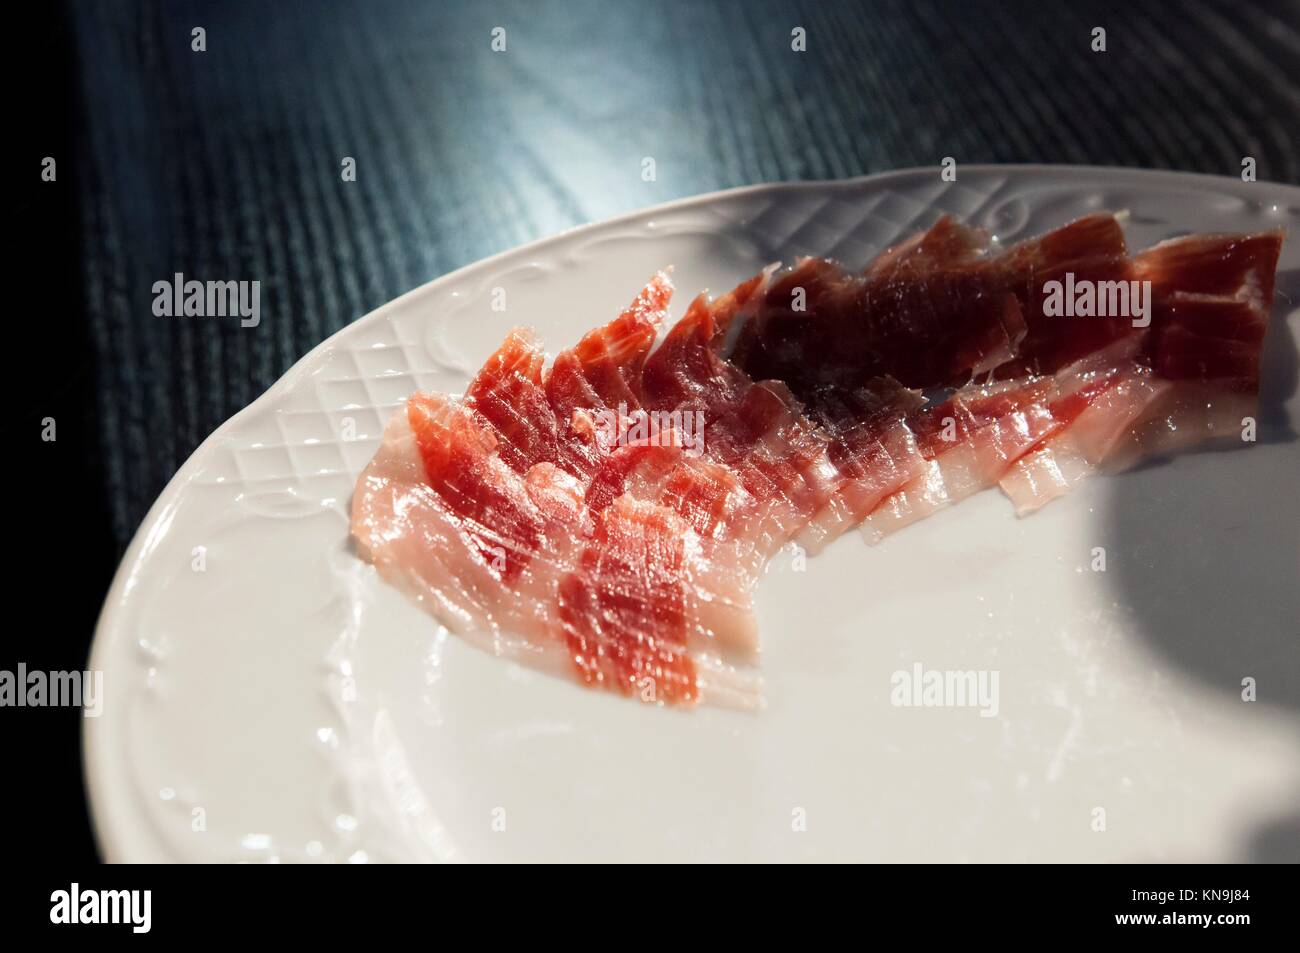 Half decorated arrangement of iberian cured ham on plate over black wooden background. Stock Photo